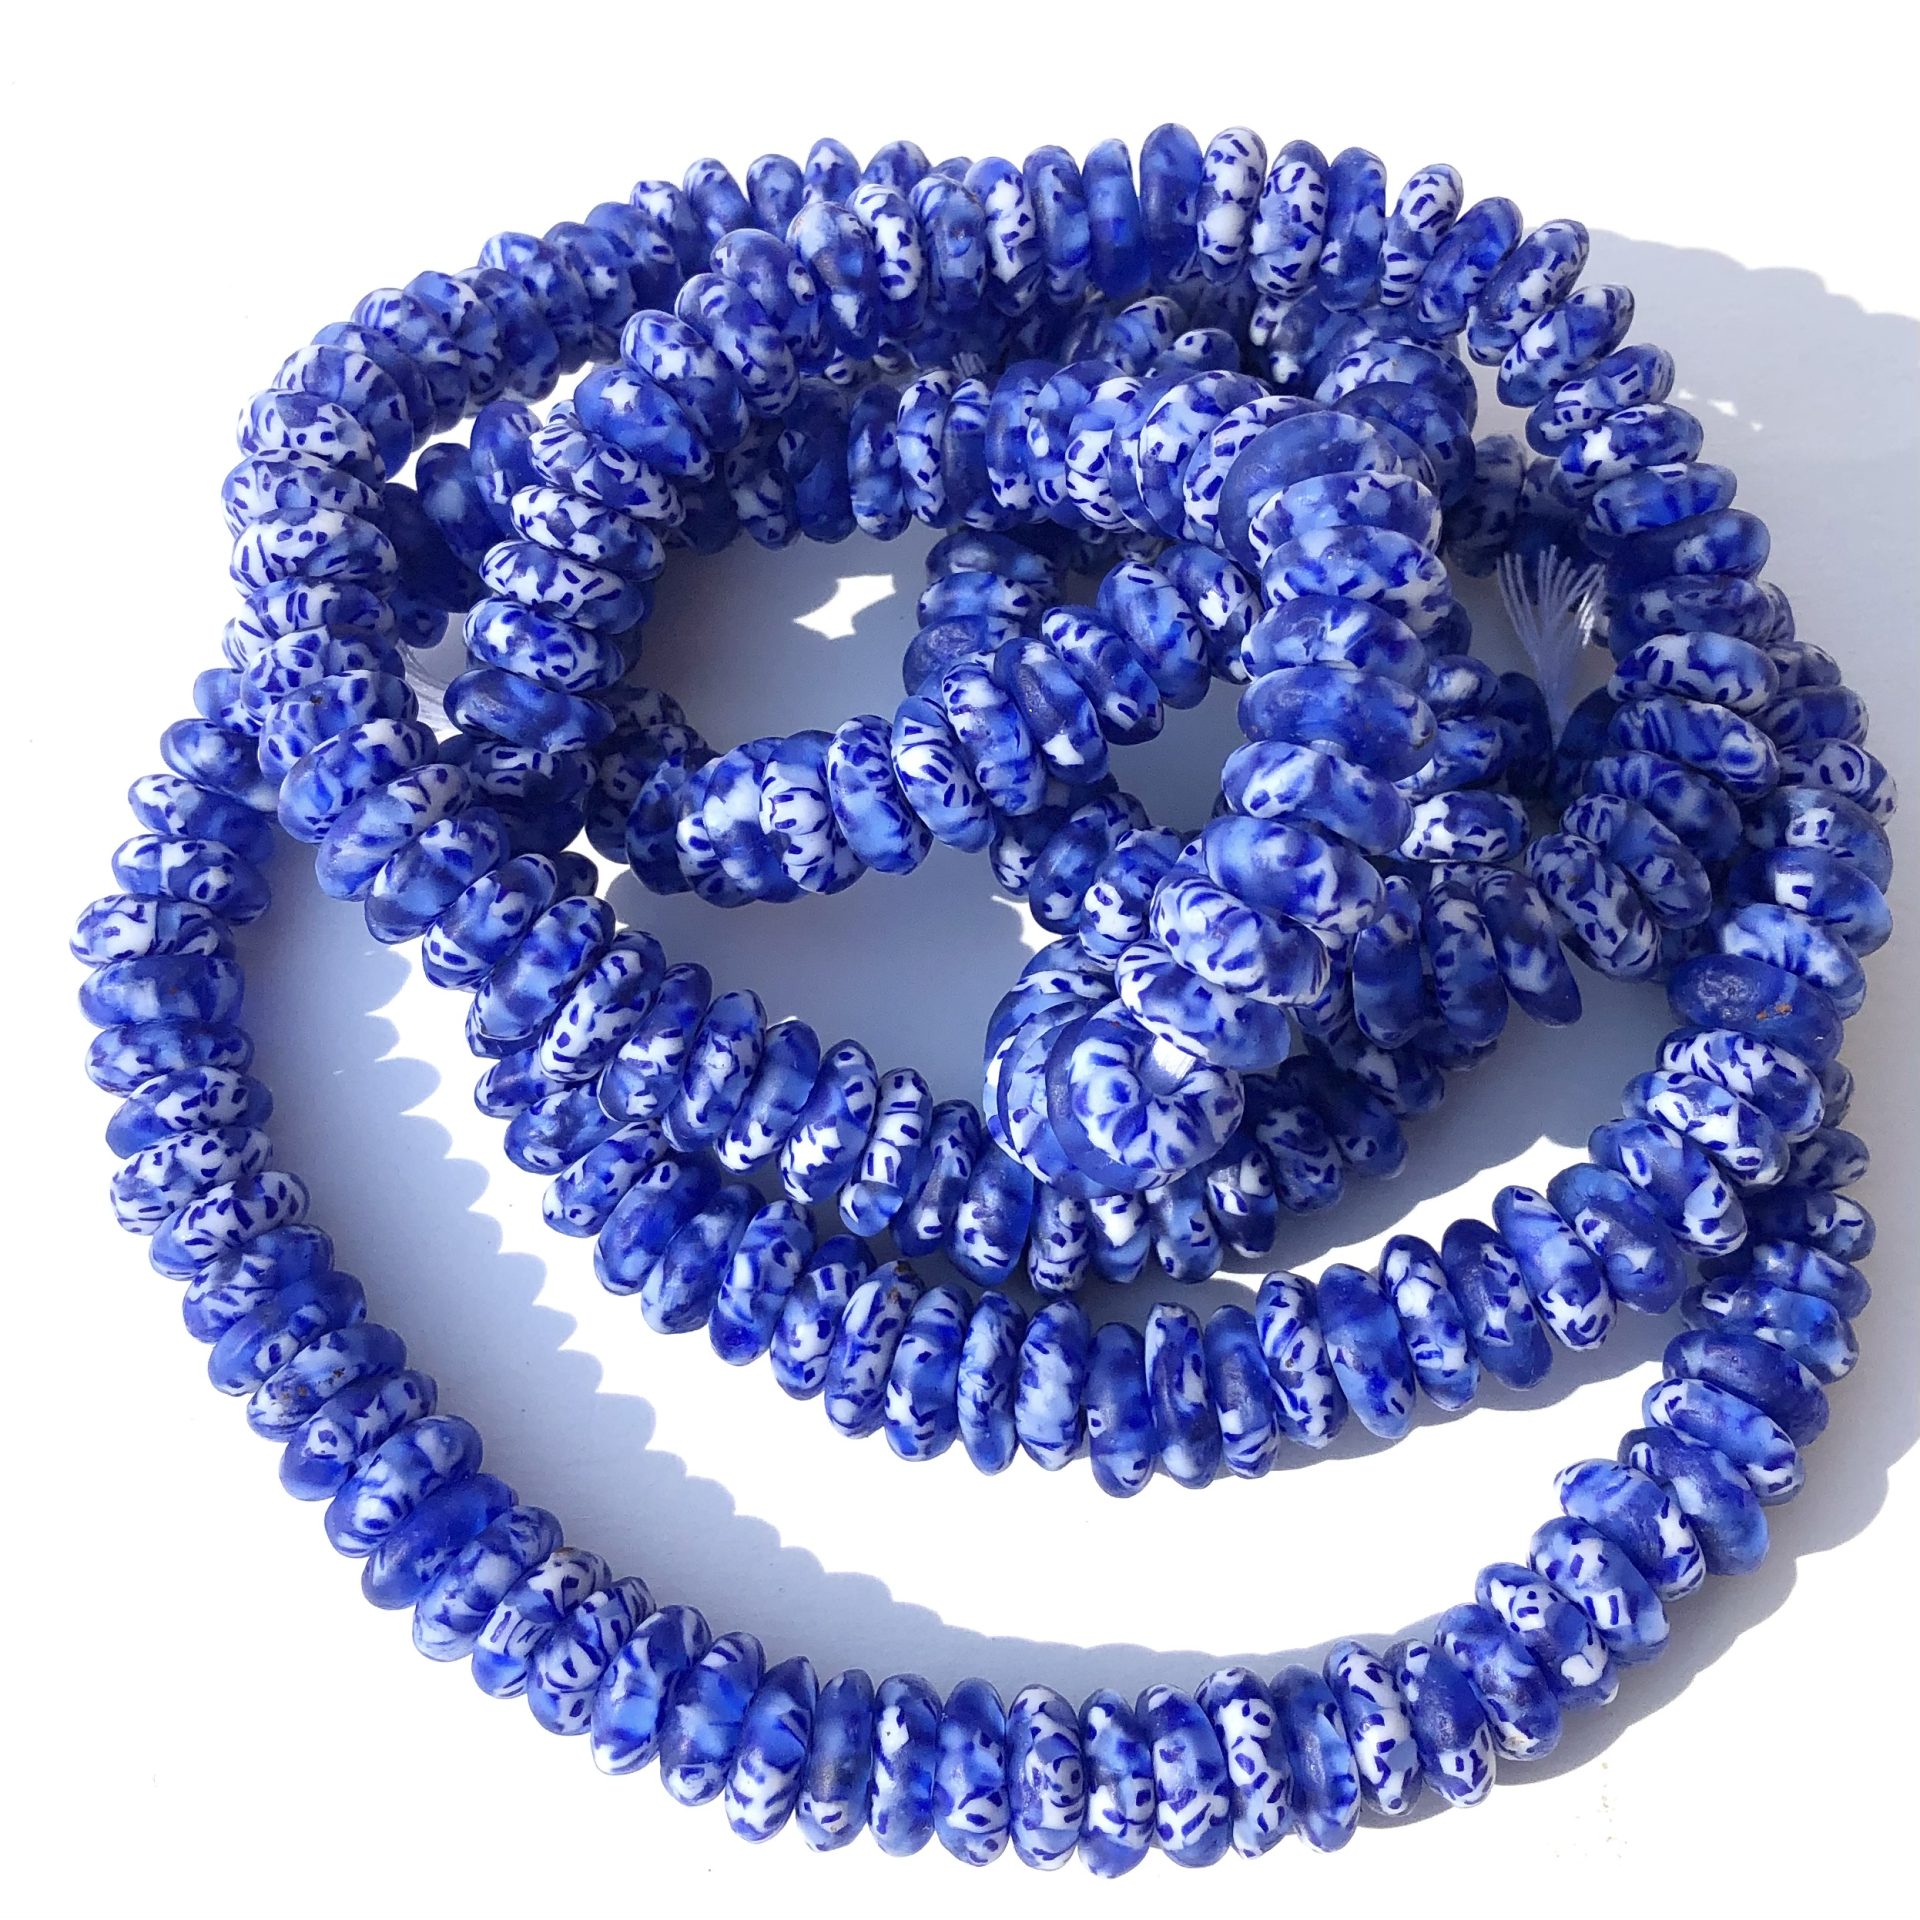 Fused Recycled Glass Beads Lifesaver